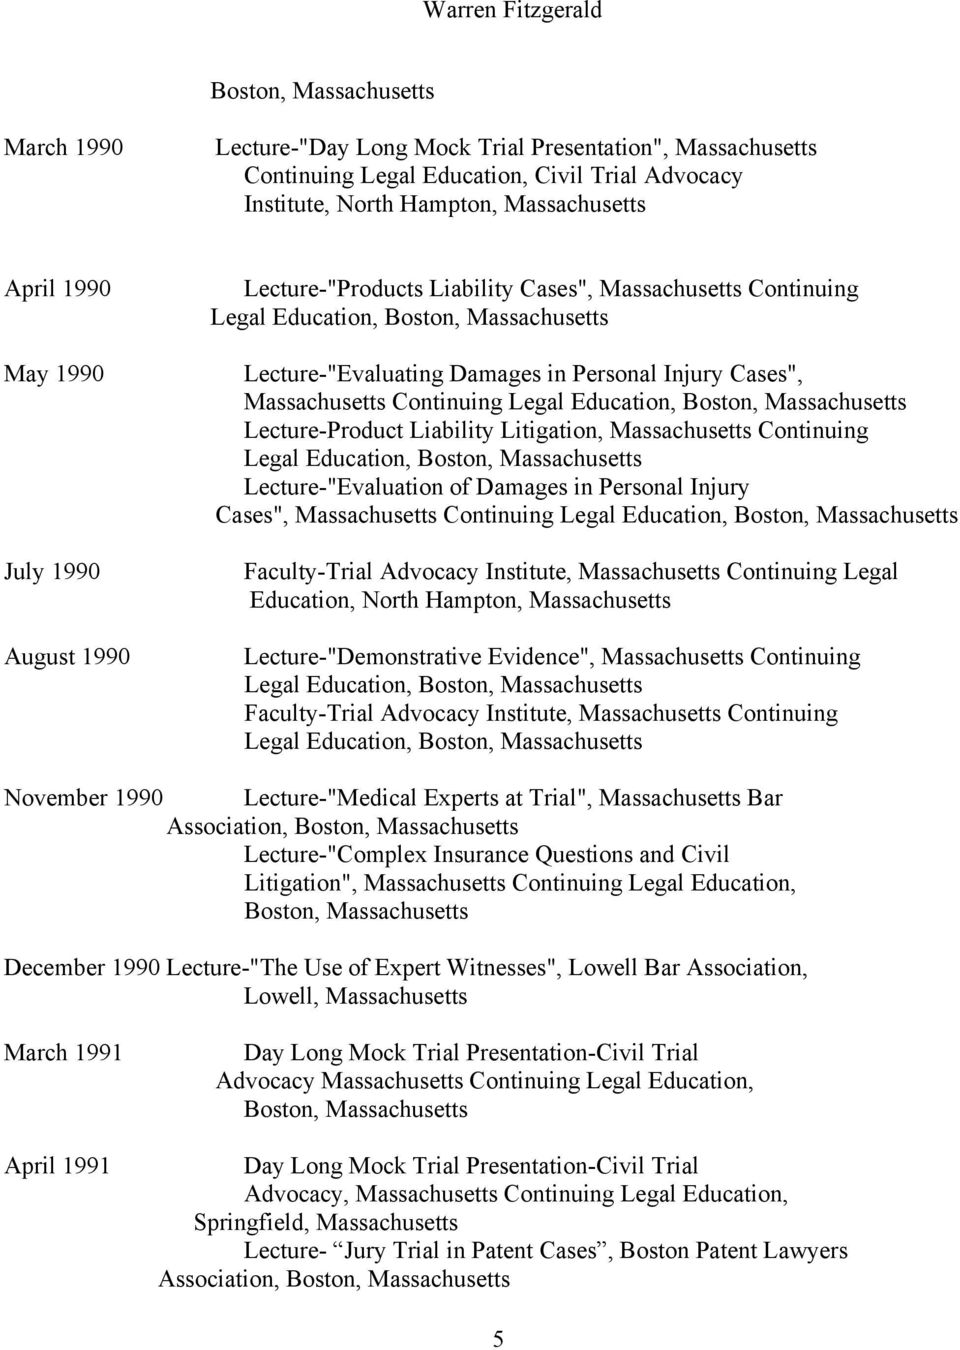 Continuing Faculty-Trial Advocacy Institute, Continuing Legal Education, North Hampton, Lecture-"Demonstrative Evidence", Continuing Faculty-Trial Advocacy Institute, Continuing November 1990